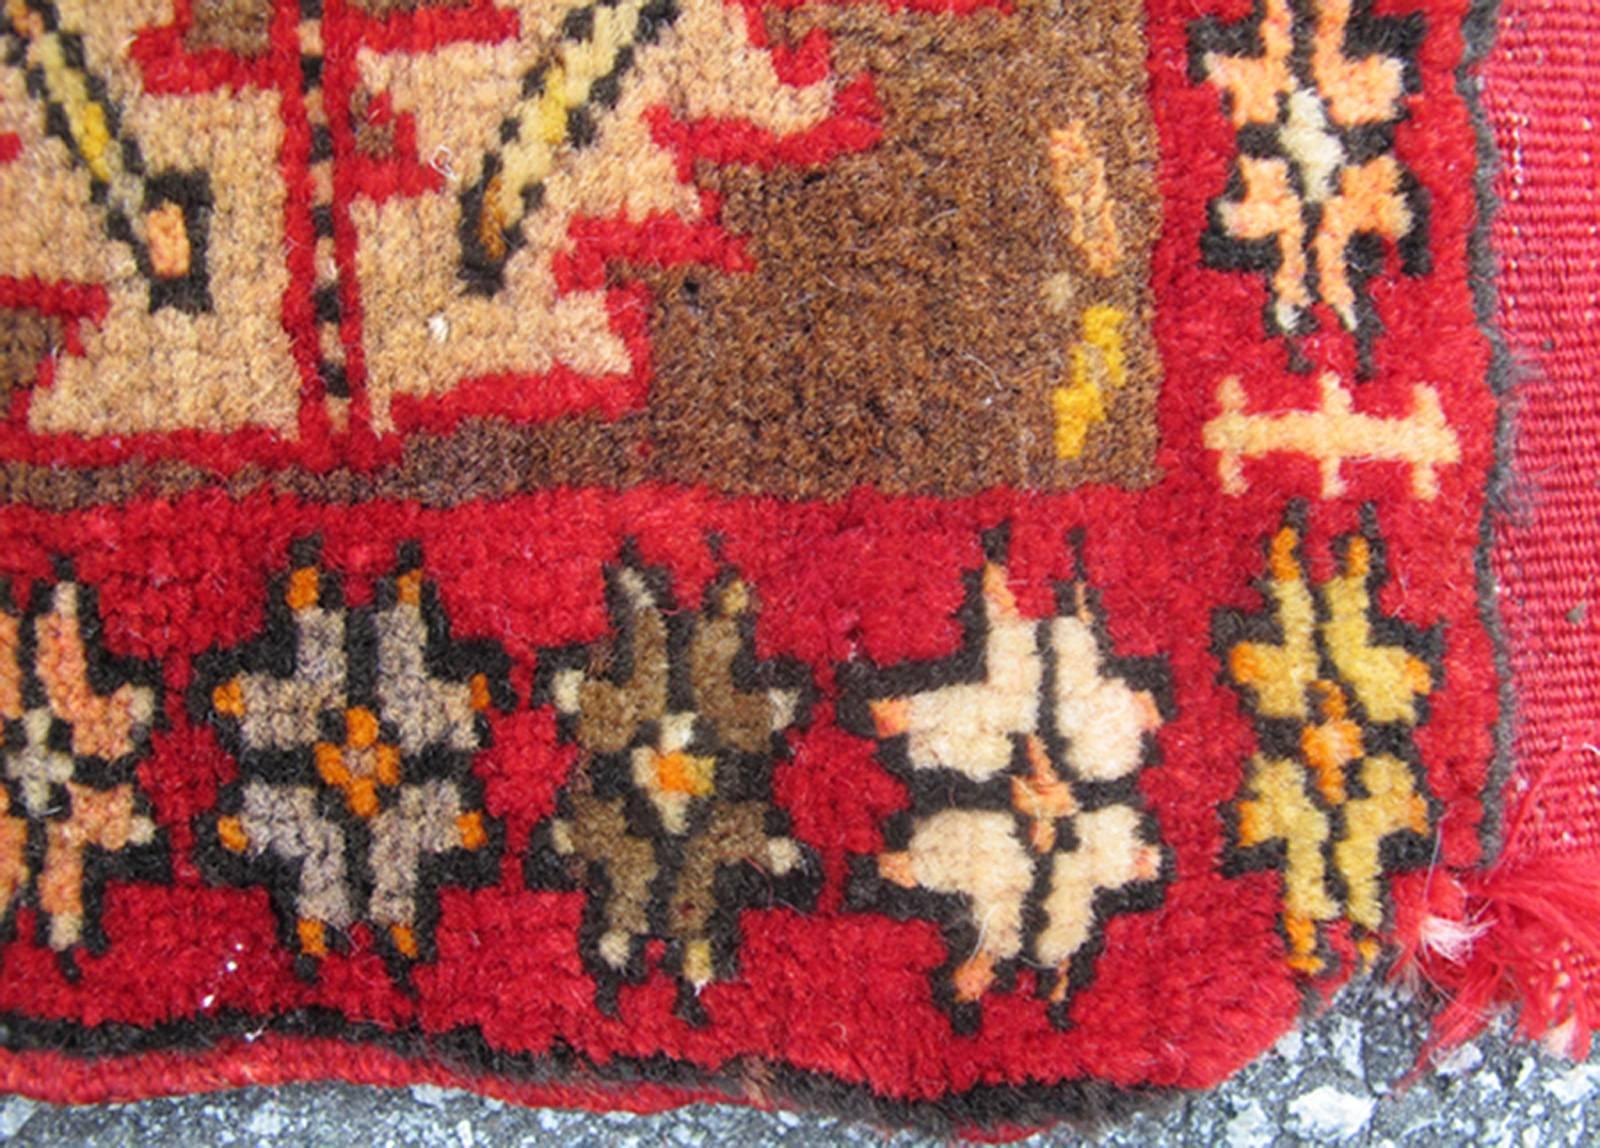 This item includes a pair (two) of Turkish rugs rendered in colors of coral, yellow and brown. There is some wear on the edges of these pieces, consistent with their age.
Each one measures: 1.0 x 1.7
This measurement does not include the flat-weave